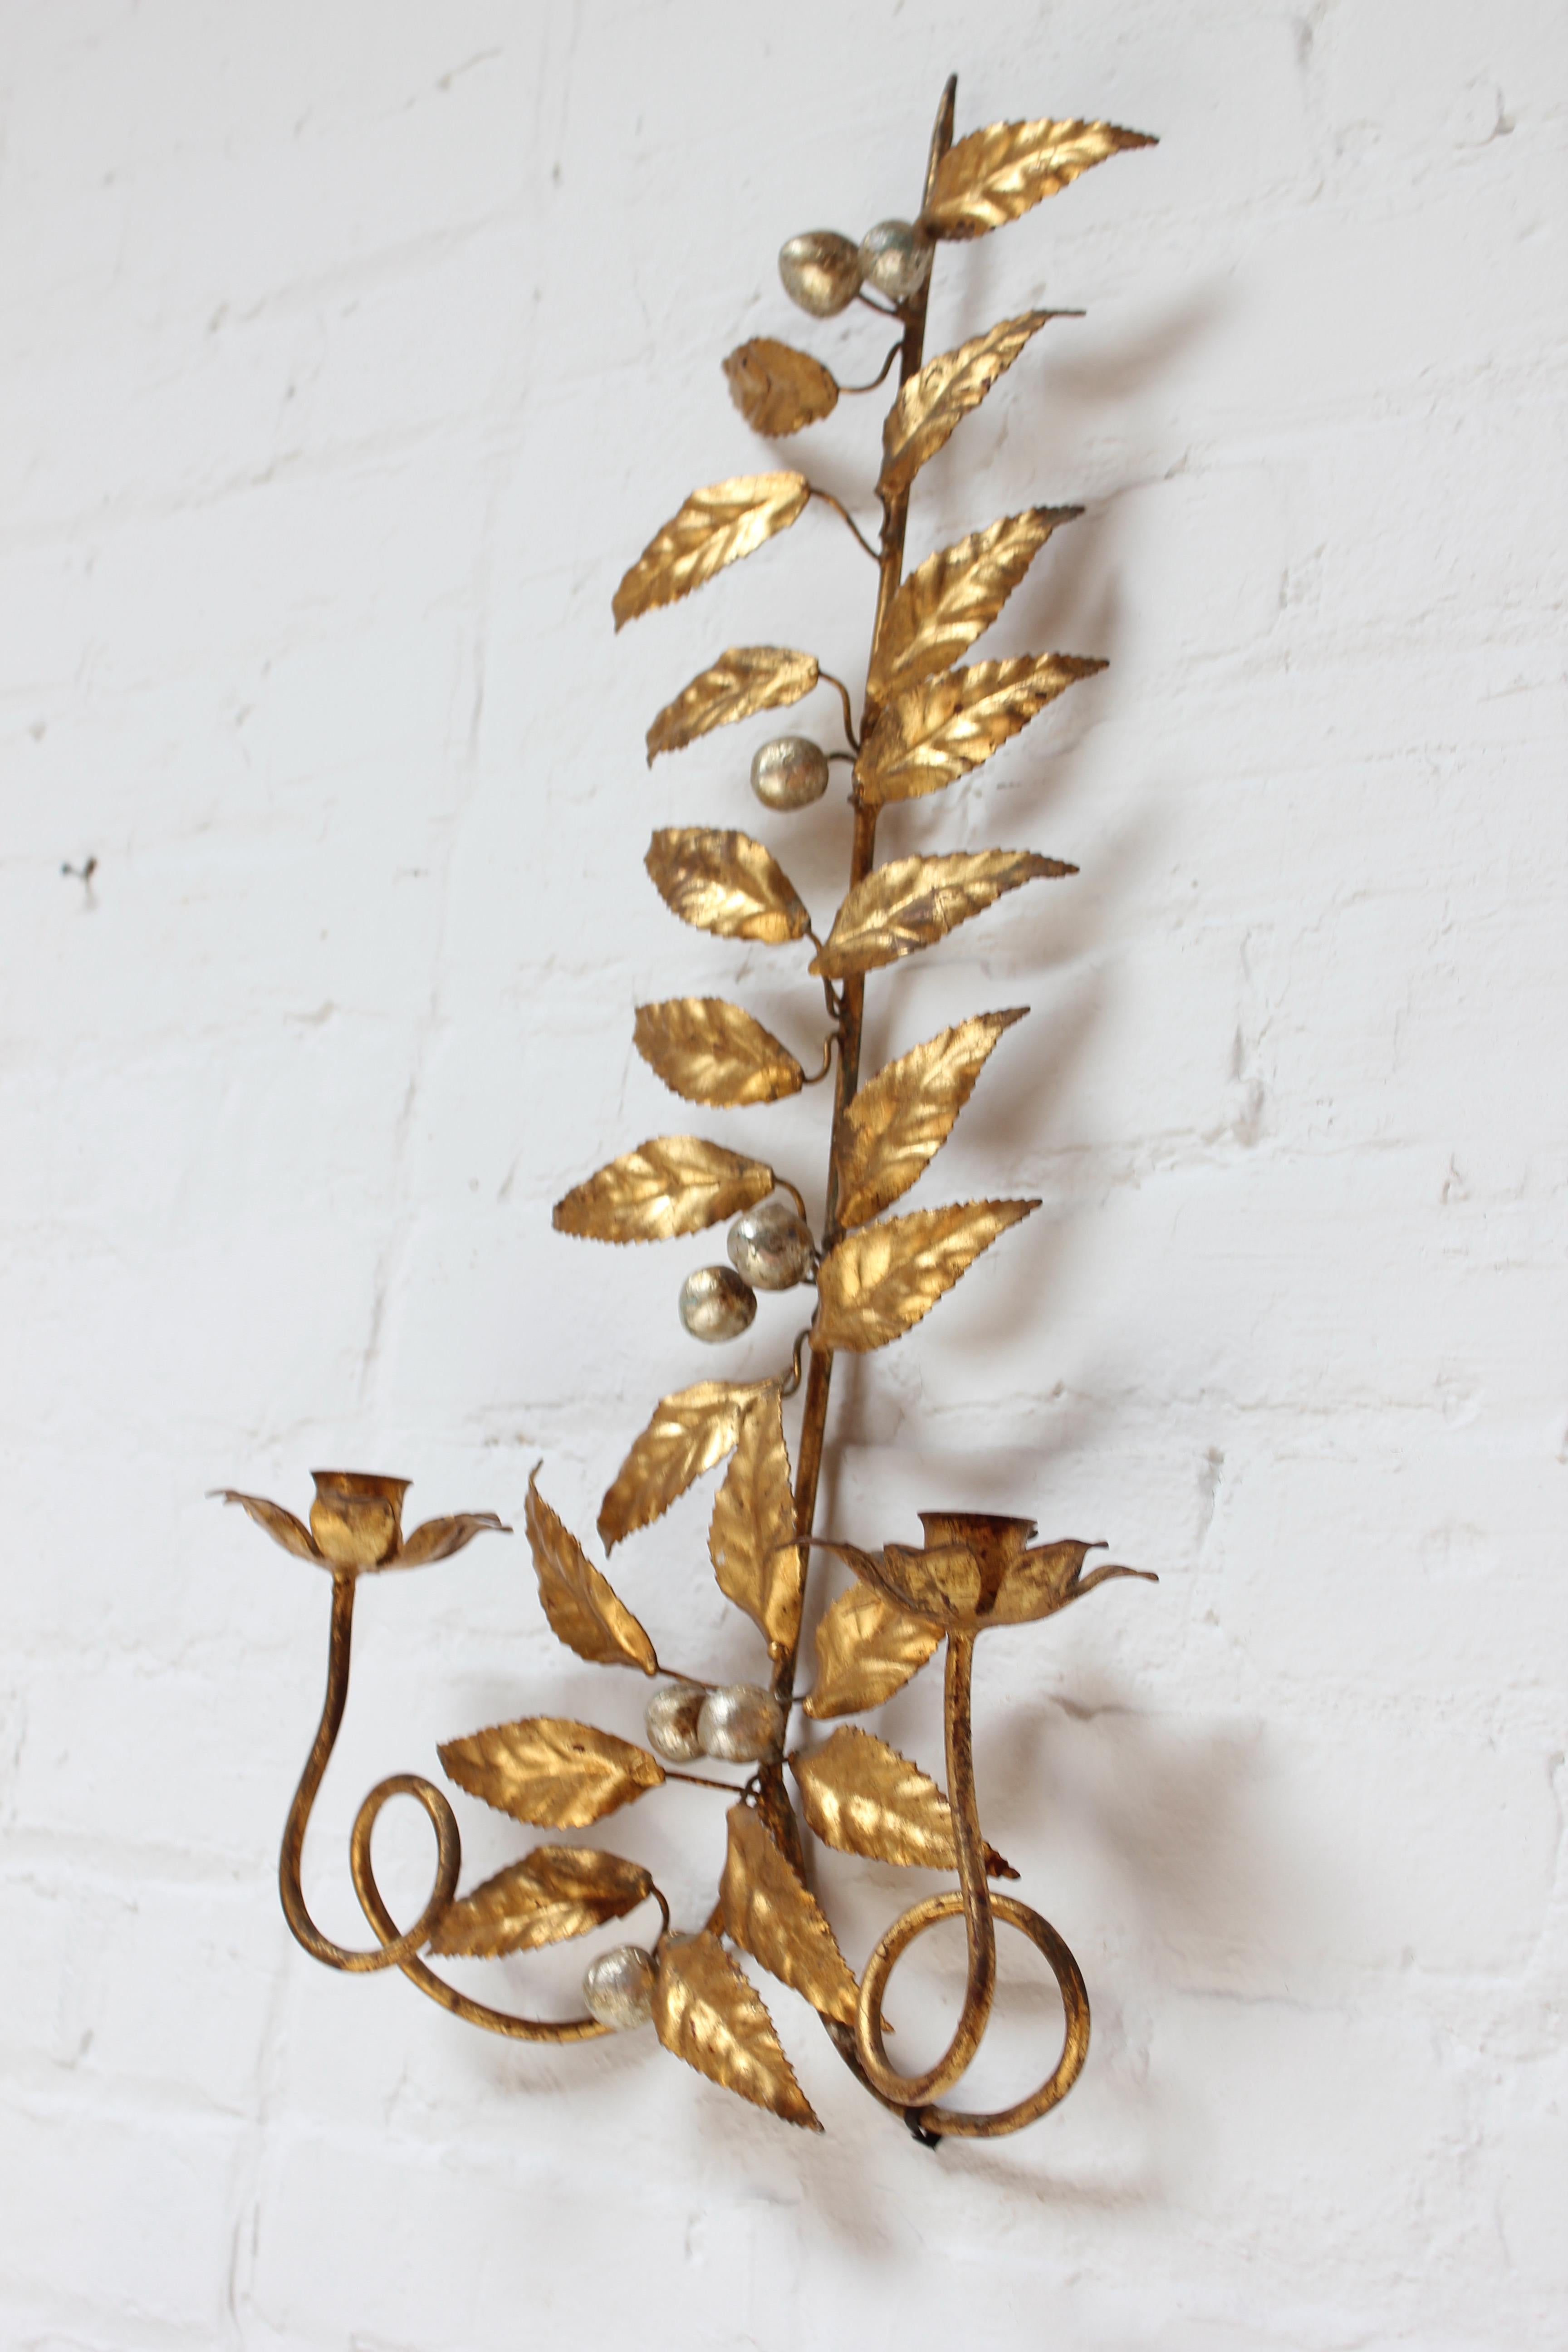 Vintage Italian Gilt Tole Florentine Sconce / Candleholder In Good Condition For Sale In Brooklyn, NY